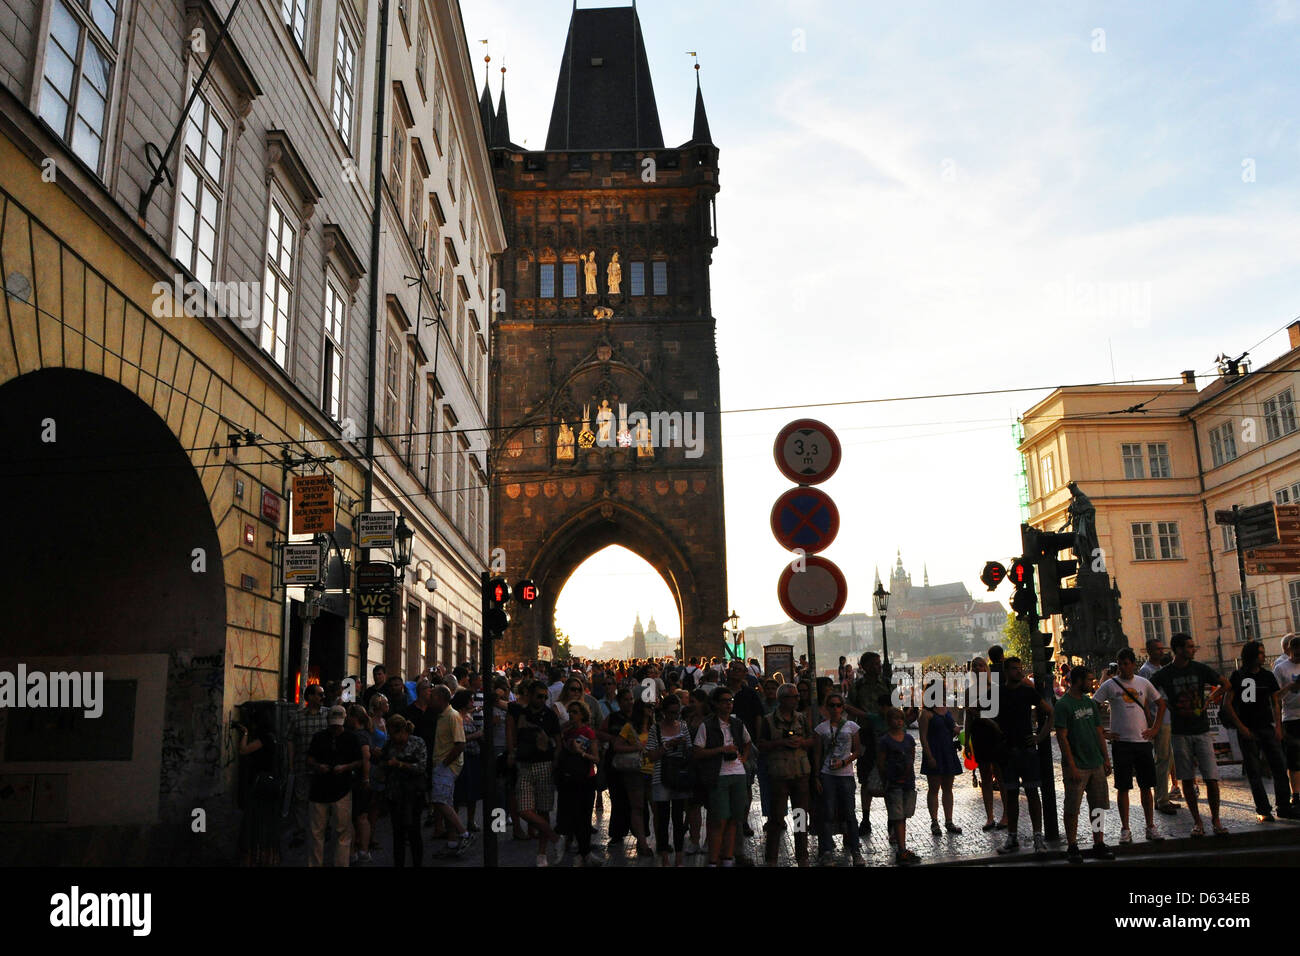 Prague packed with tourists in the late evening sun, with Old Town Bridge tower leading onto Charles Bridge. Stock Photo